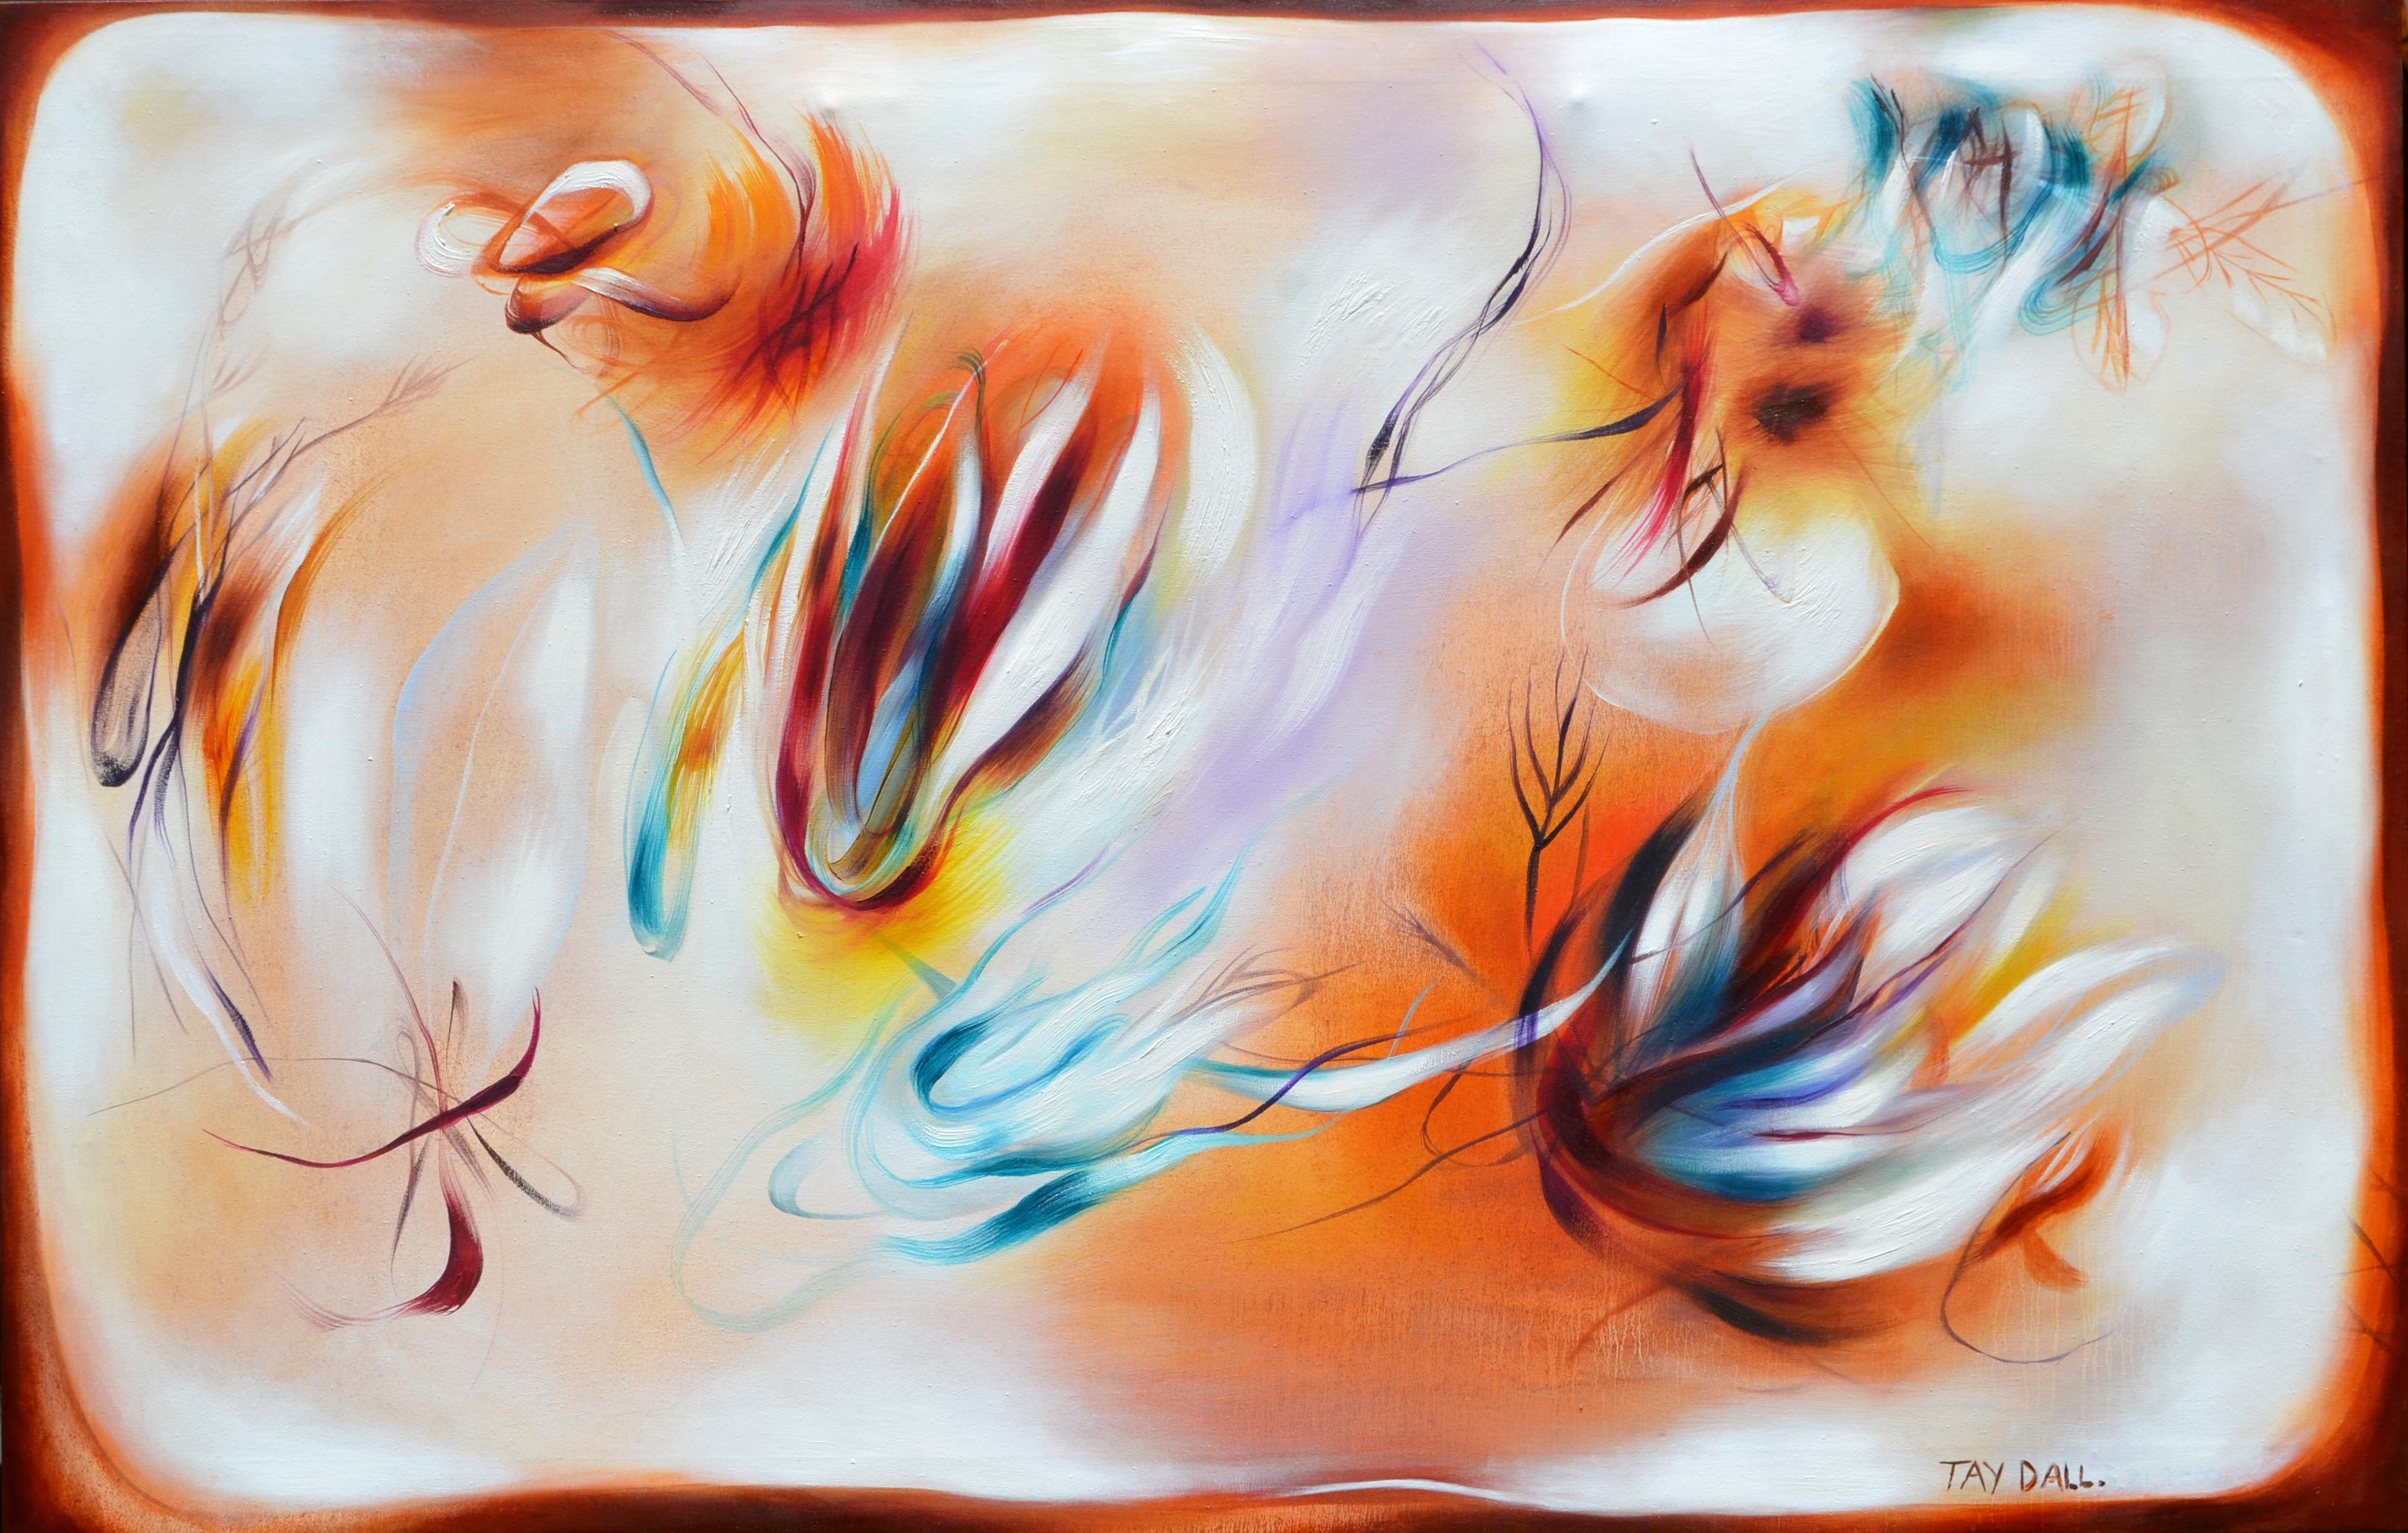 Sienna Surreal Abstract Painting "Growing Harvest"